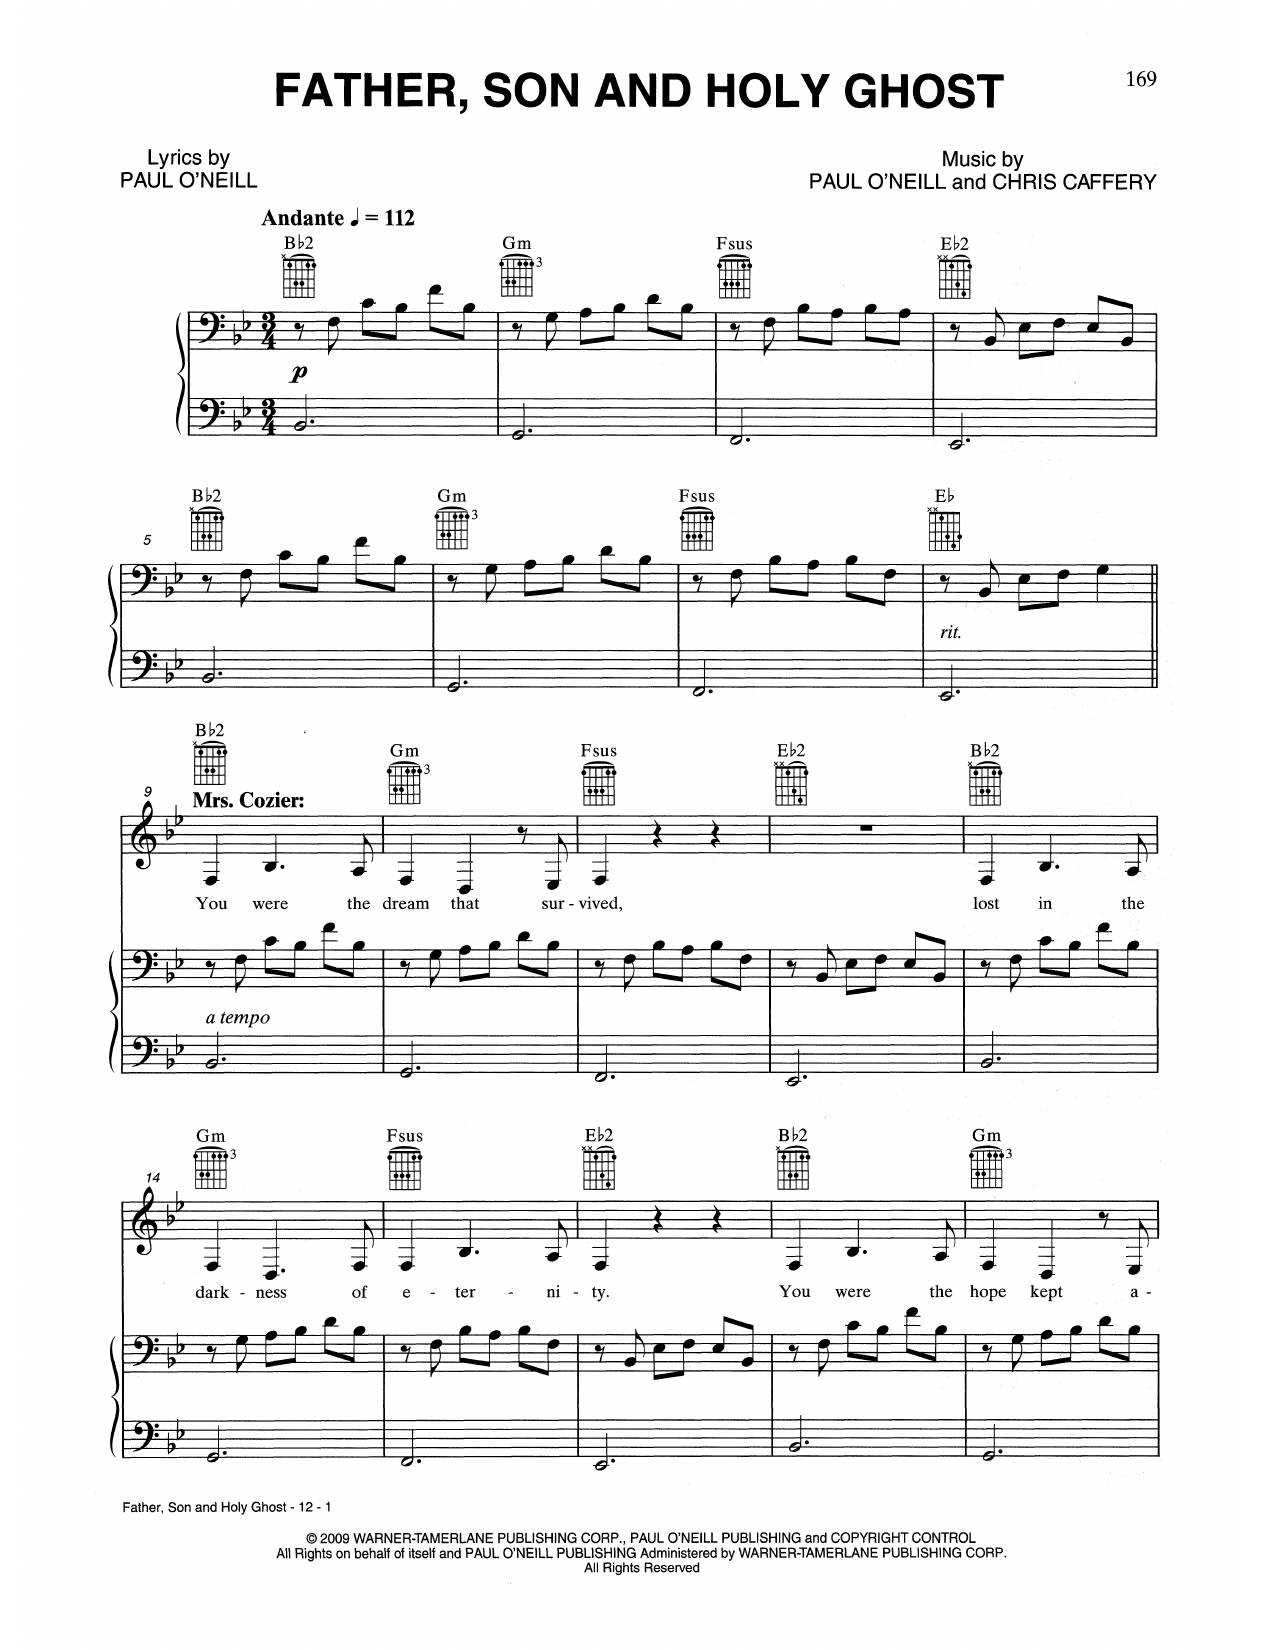 Download Trans-Siberian Orchestra Father, Son And Holy Ghost Sheet Music